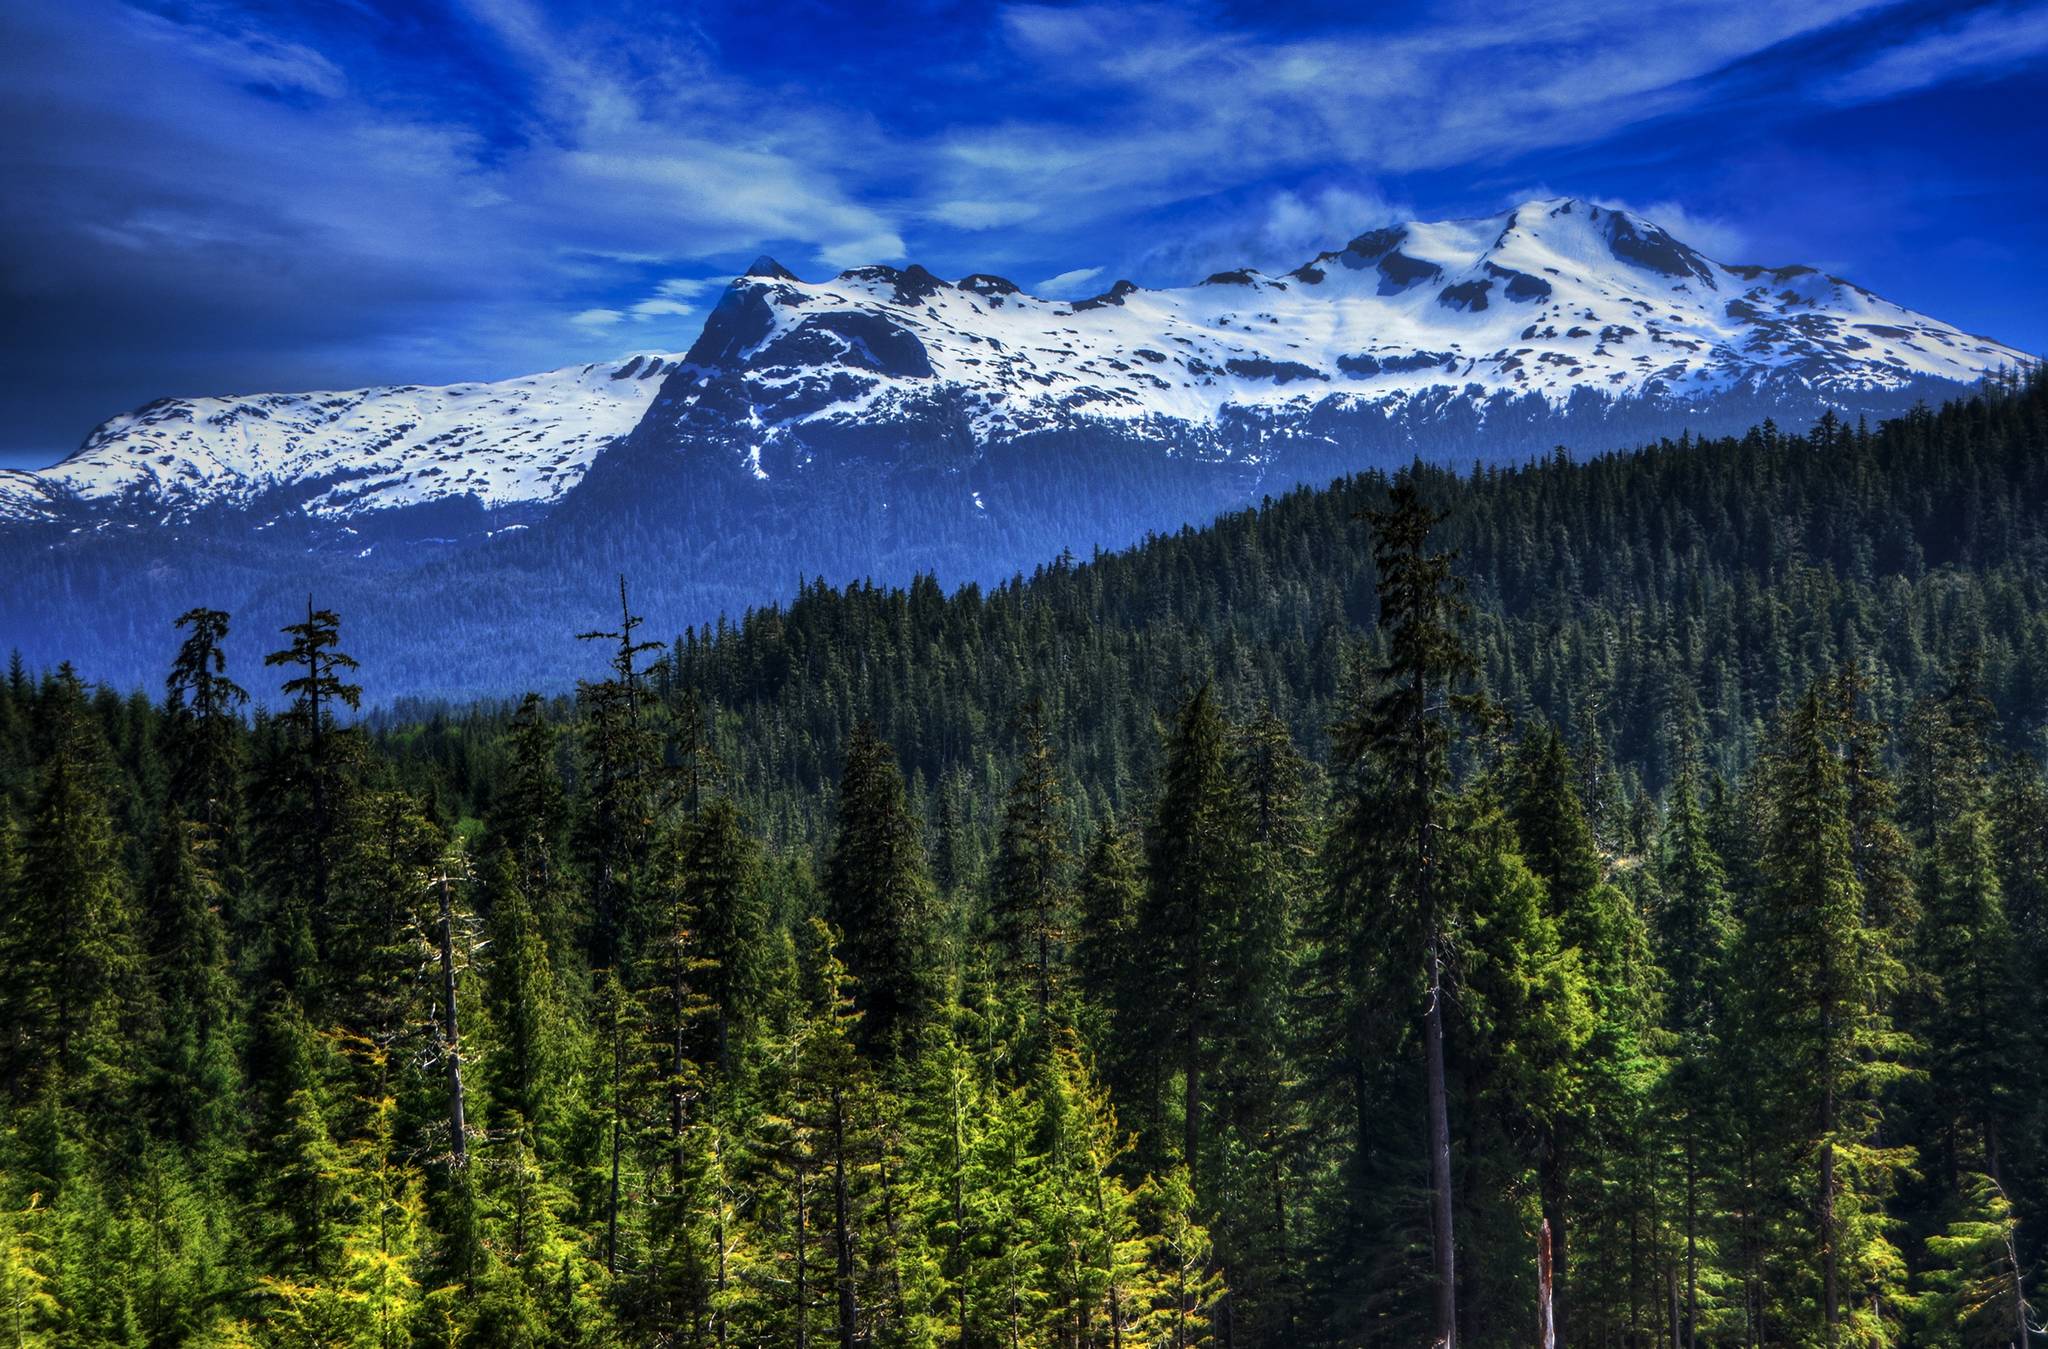 Prince of Wales Island was named as a potential site for mining during an industry panel held as part of the annual Southeast Conference meeting. Industry leaders said they believe increased mining would be good for Southeast Alaska’s economy and for the U.S. as a whole. (Courtesy Photo / Kieran MacAuliffe, Pixabay )